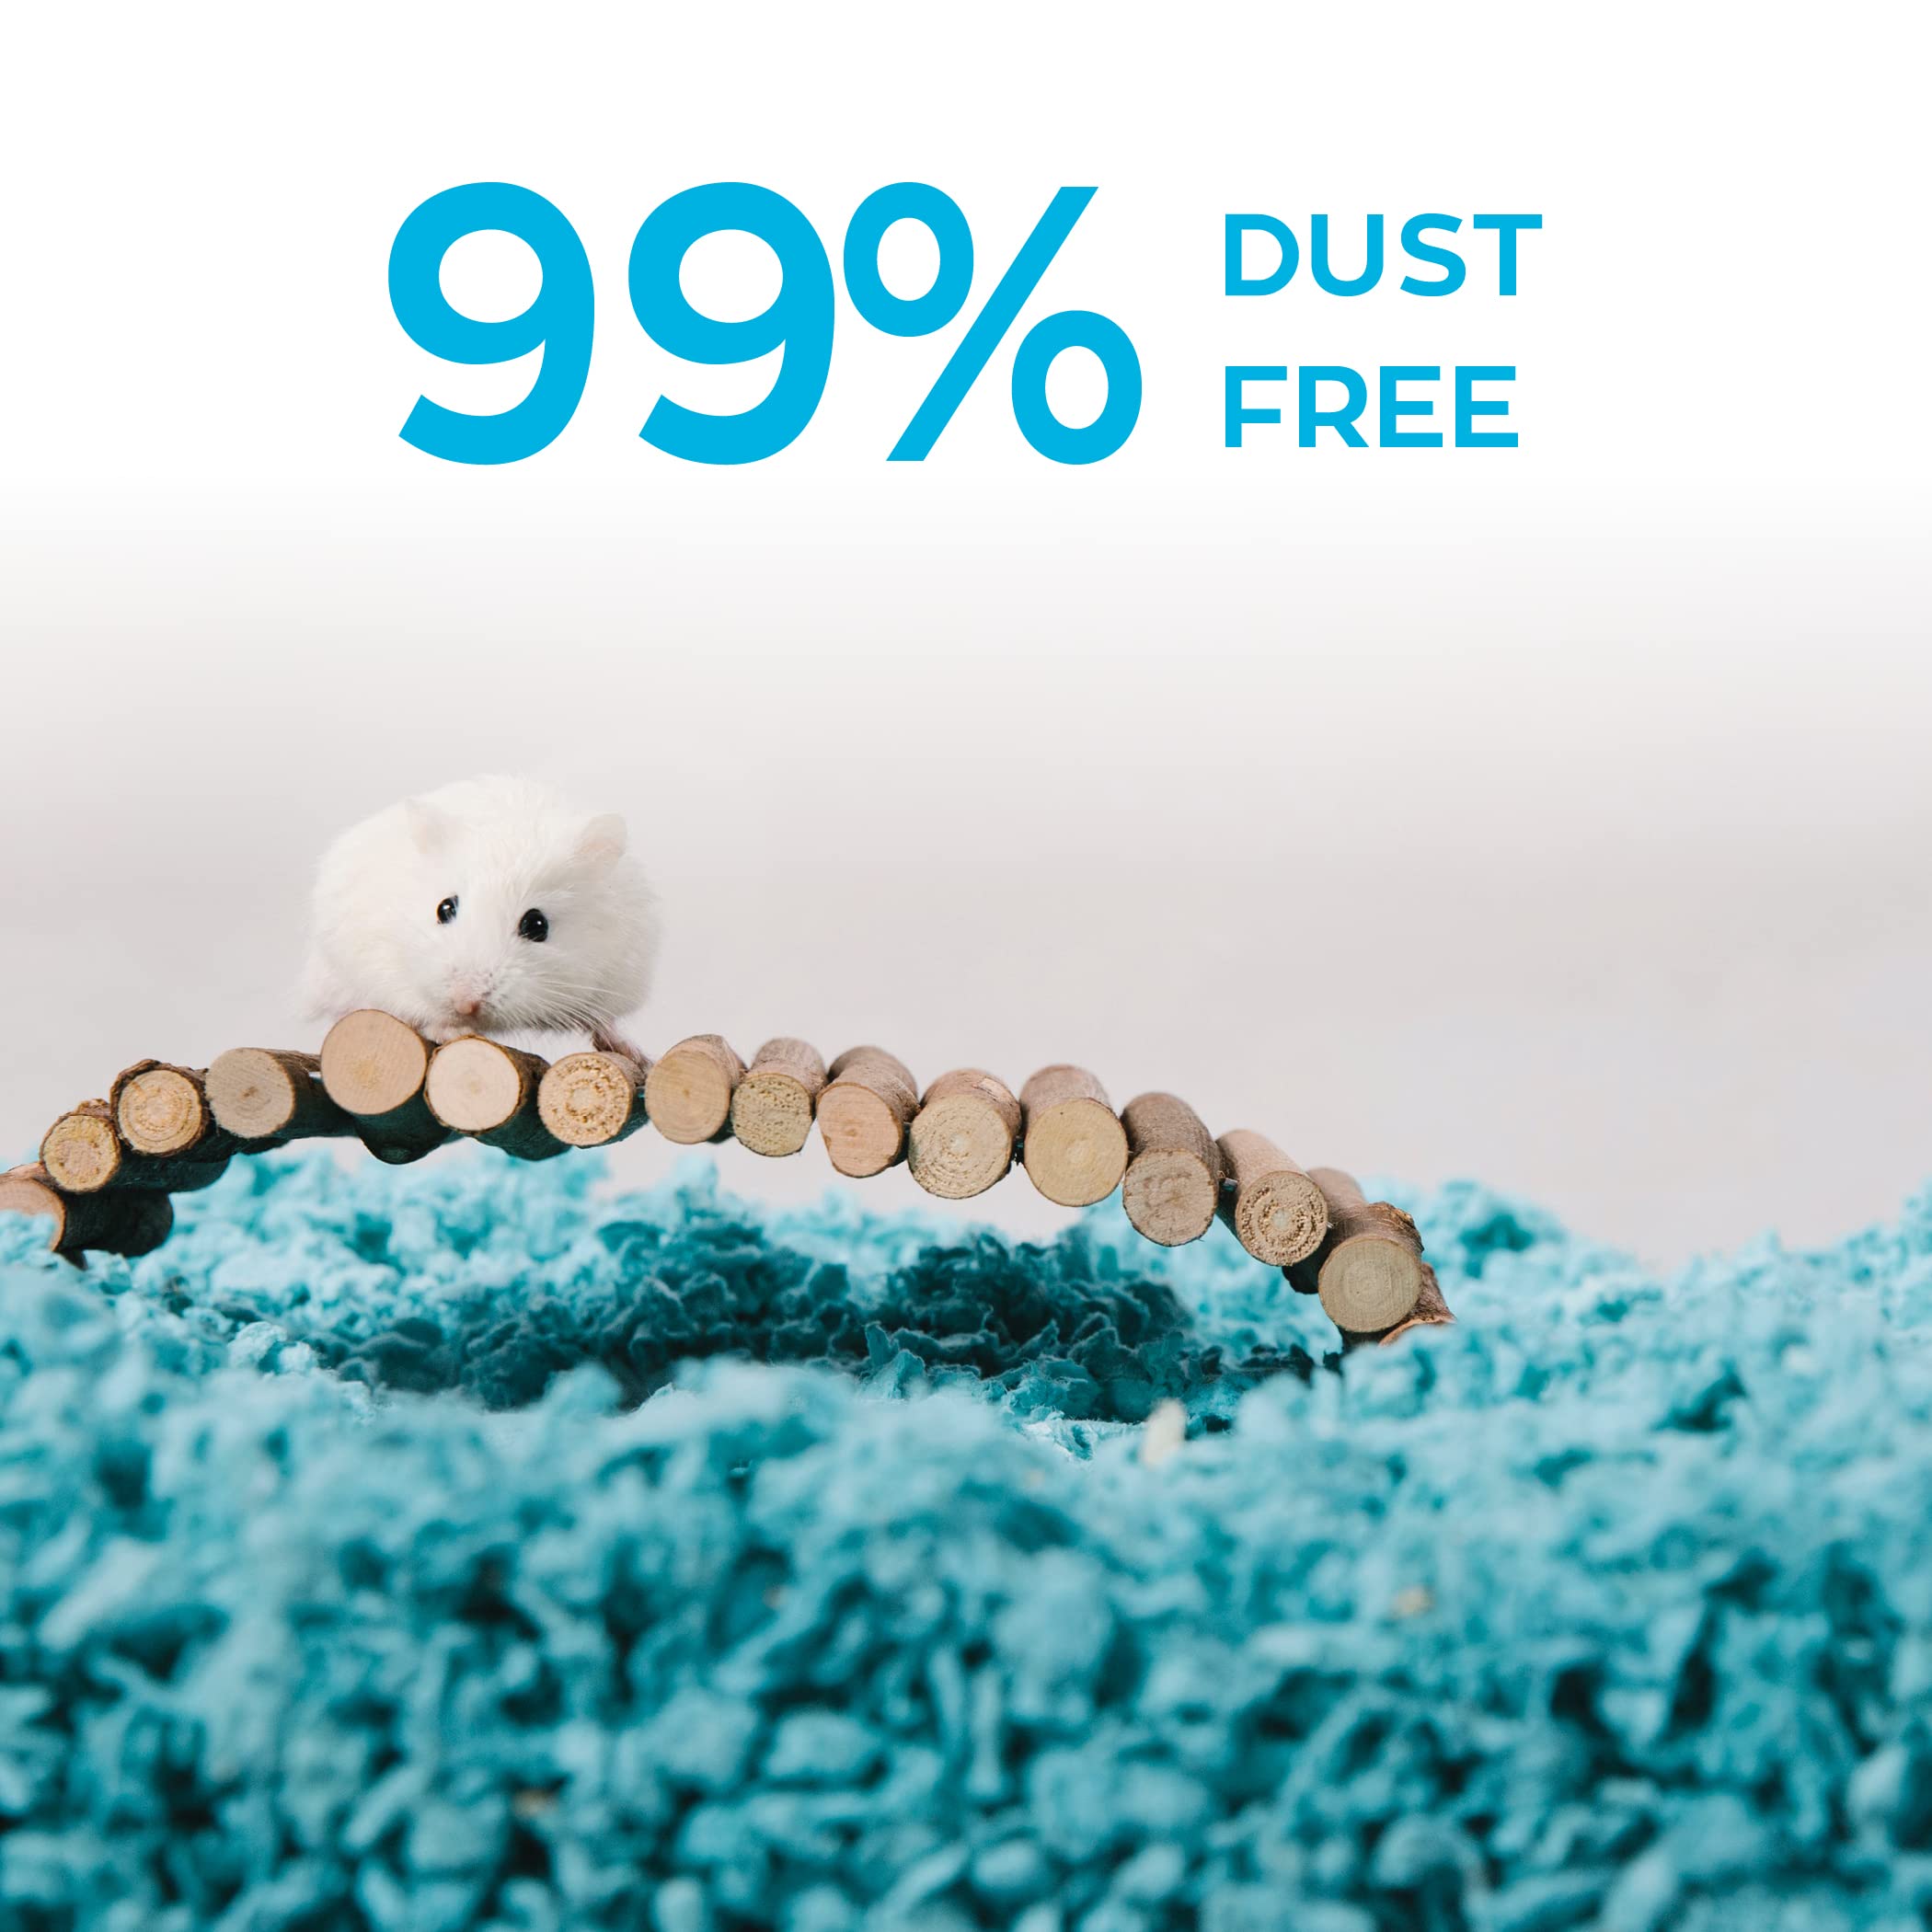 Carefresh 99% Dust-Free Blue Natural Paper Small Pet Bedding with Odor Control, 50 L